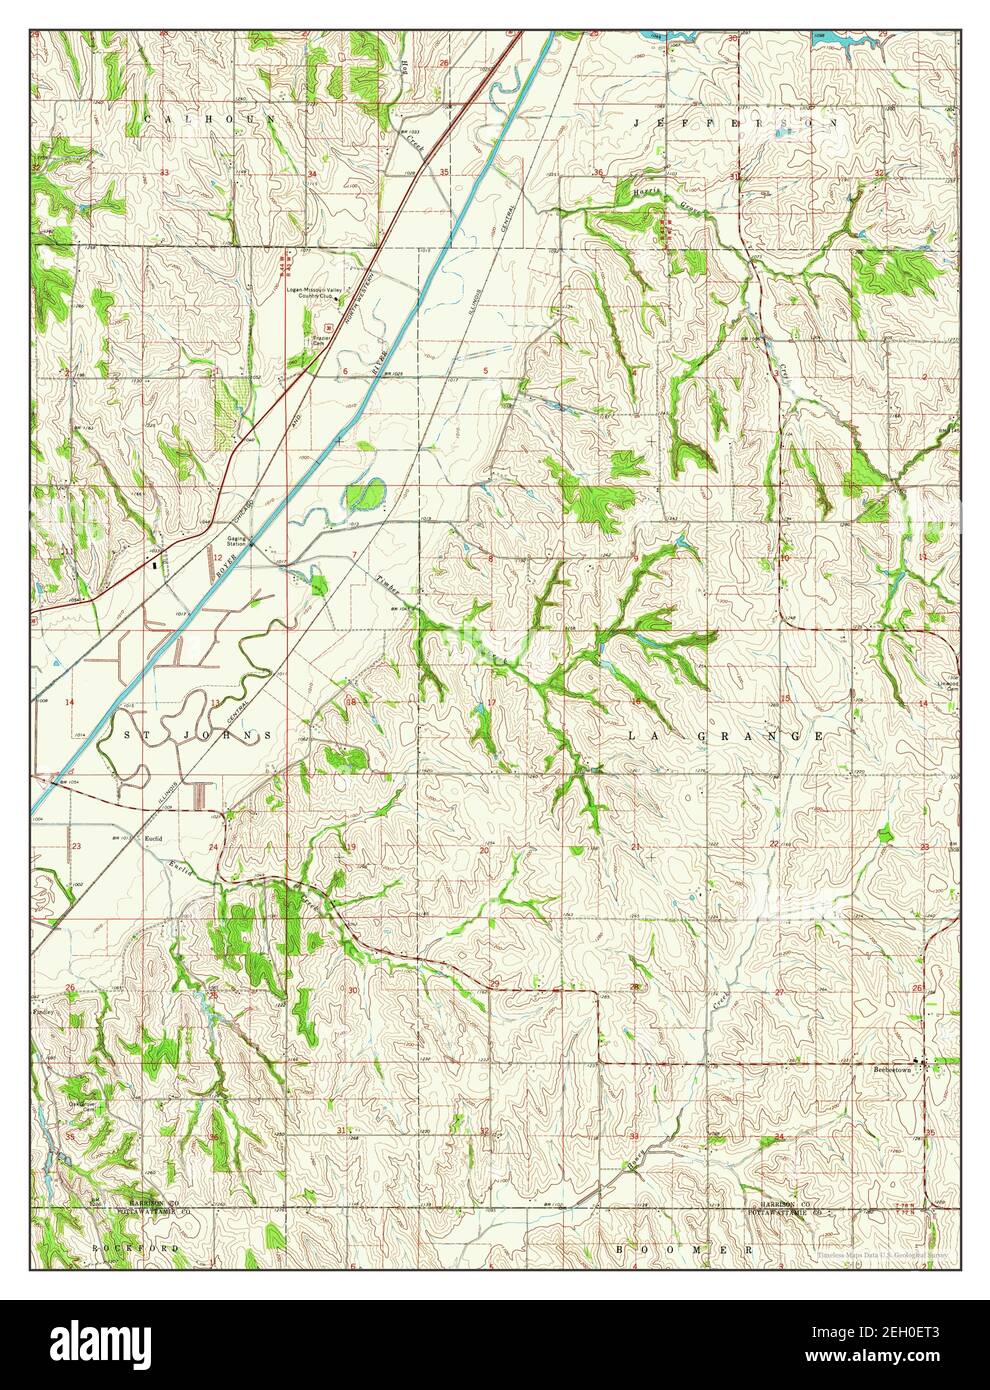 Beebeetown, Iowa, map 1970, 1:24000, United States of America by Timeless Maps, data U.S. Geological Survey Stock Photo